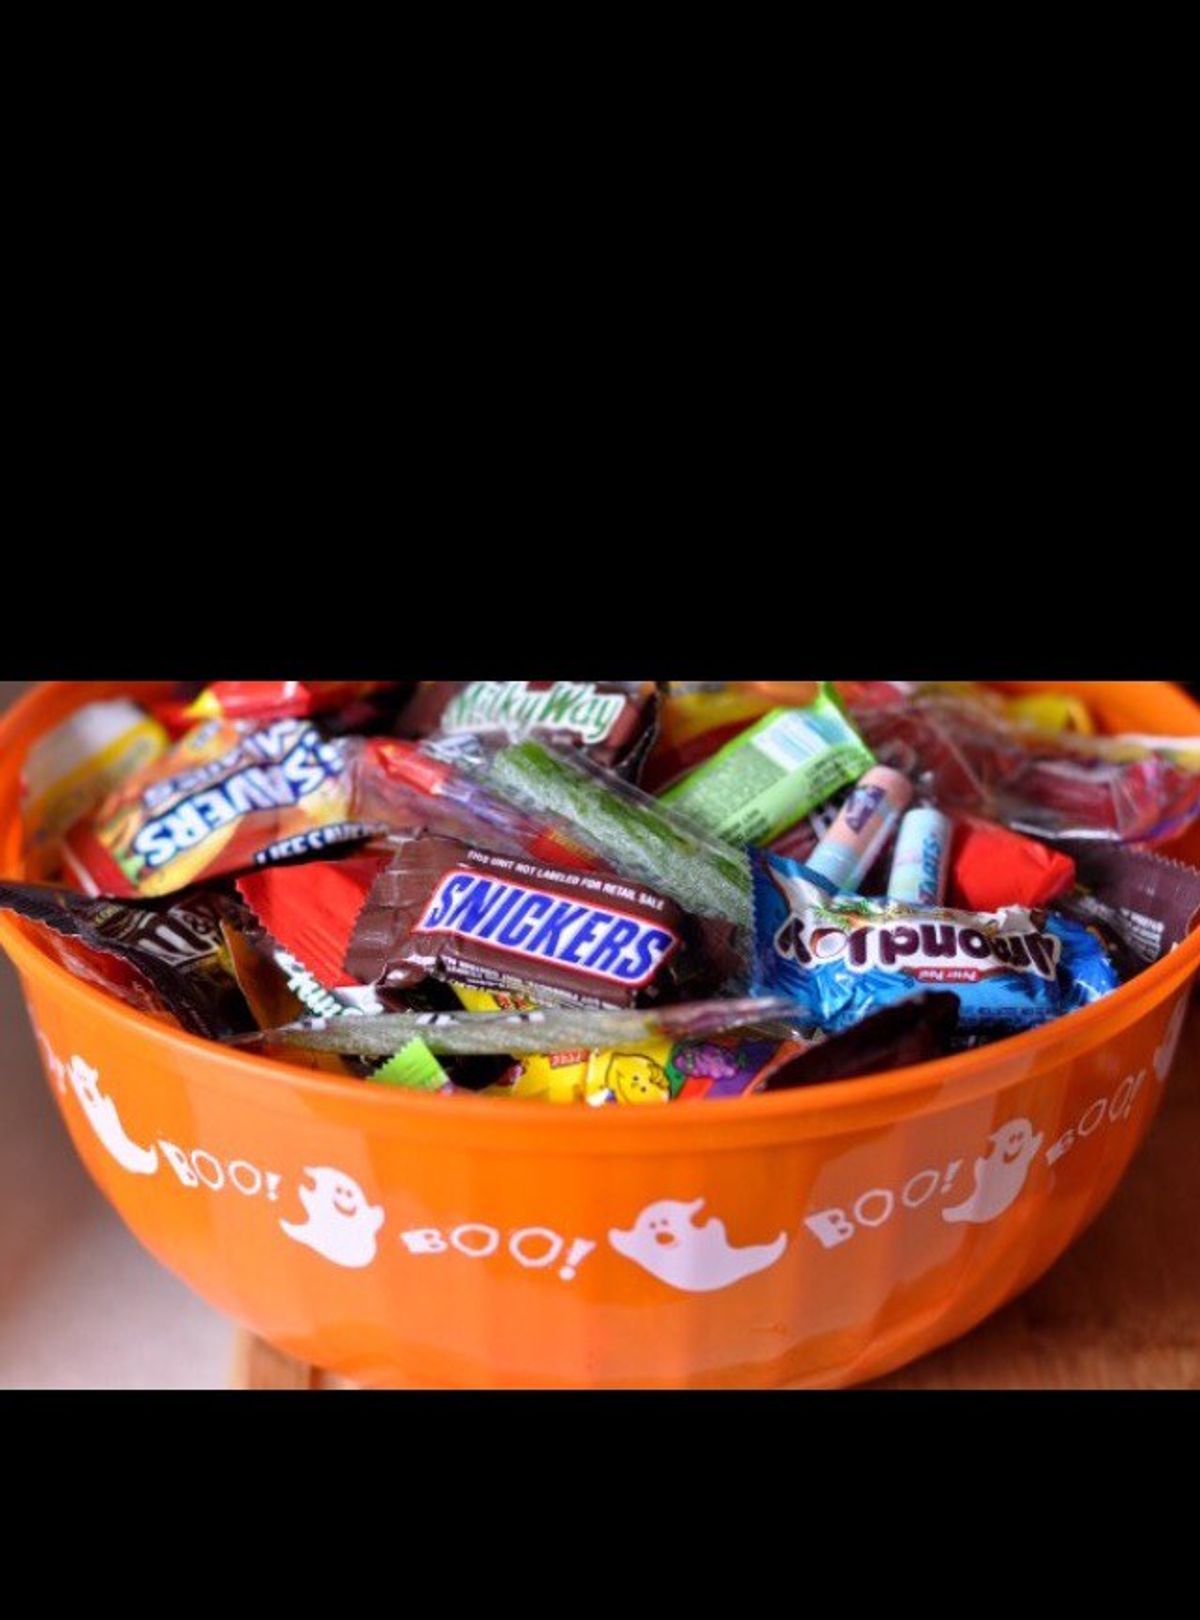 10 Most Loved Halloween Candies